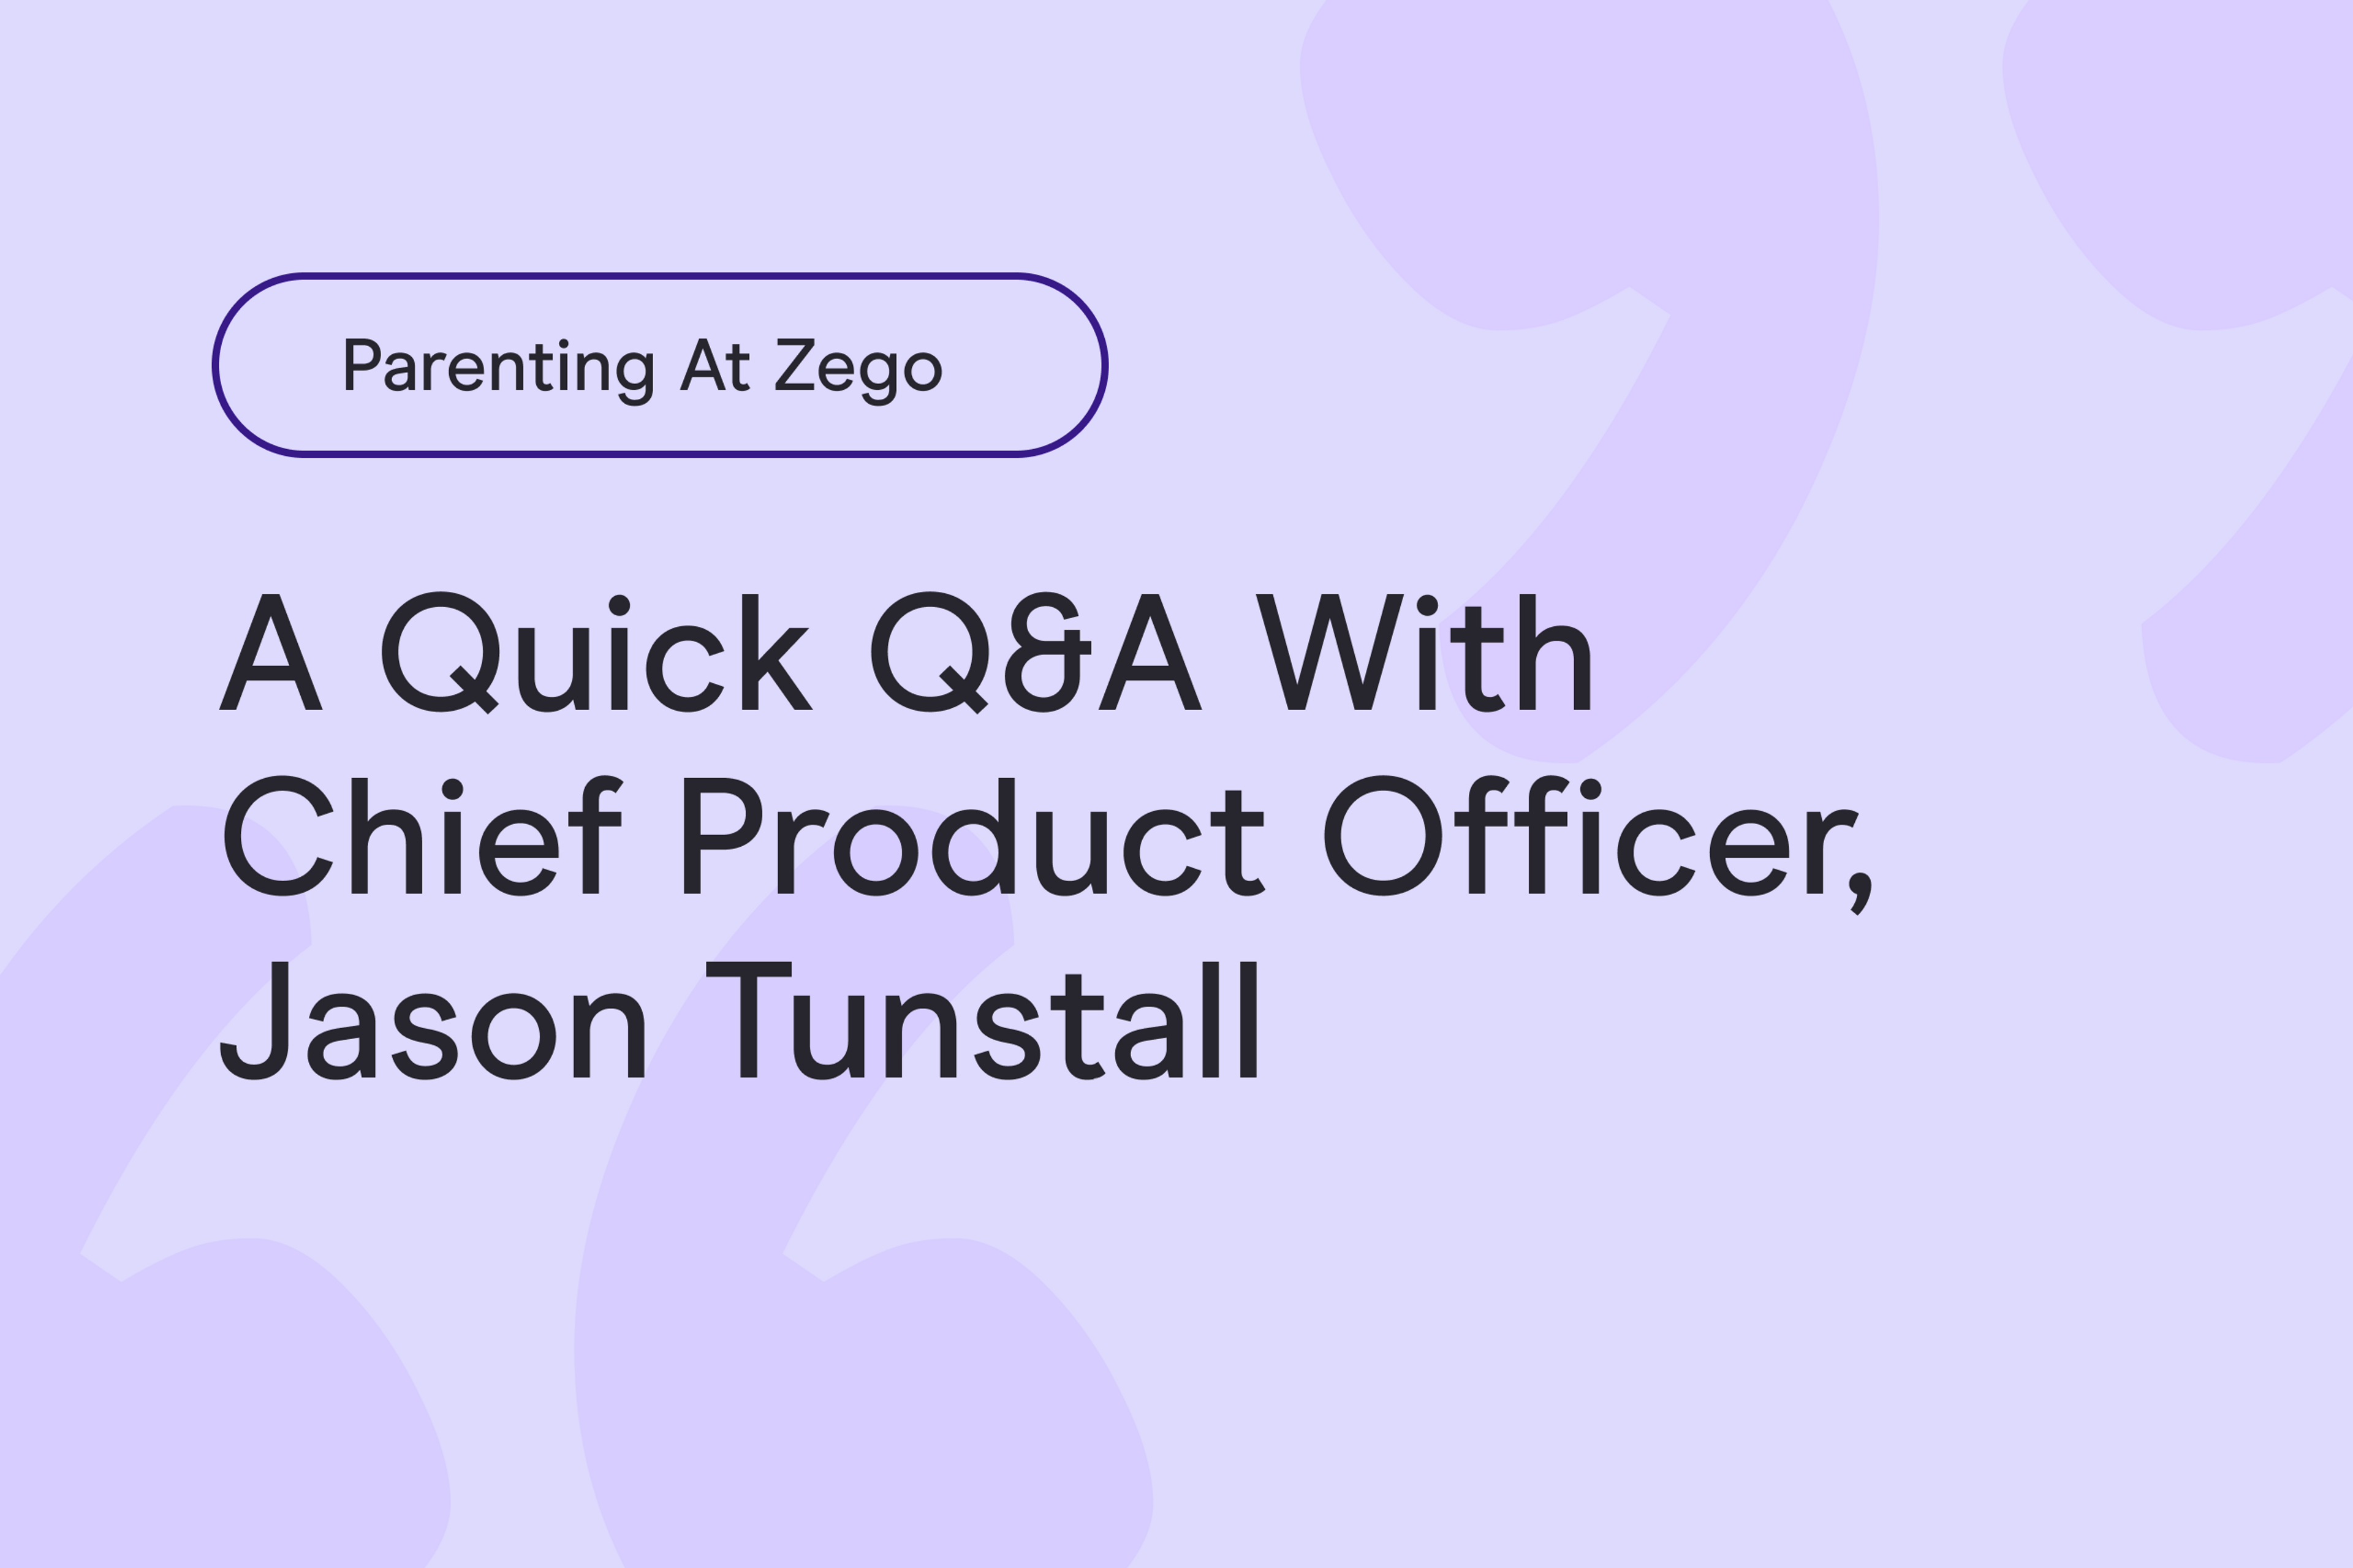 Parenting at Zego: a quick Q&A with Chief Product Officer, Jason Tunstall